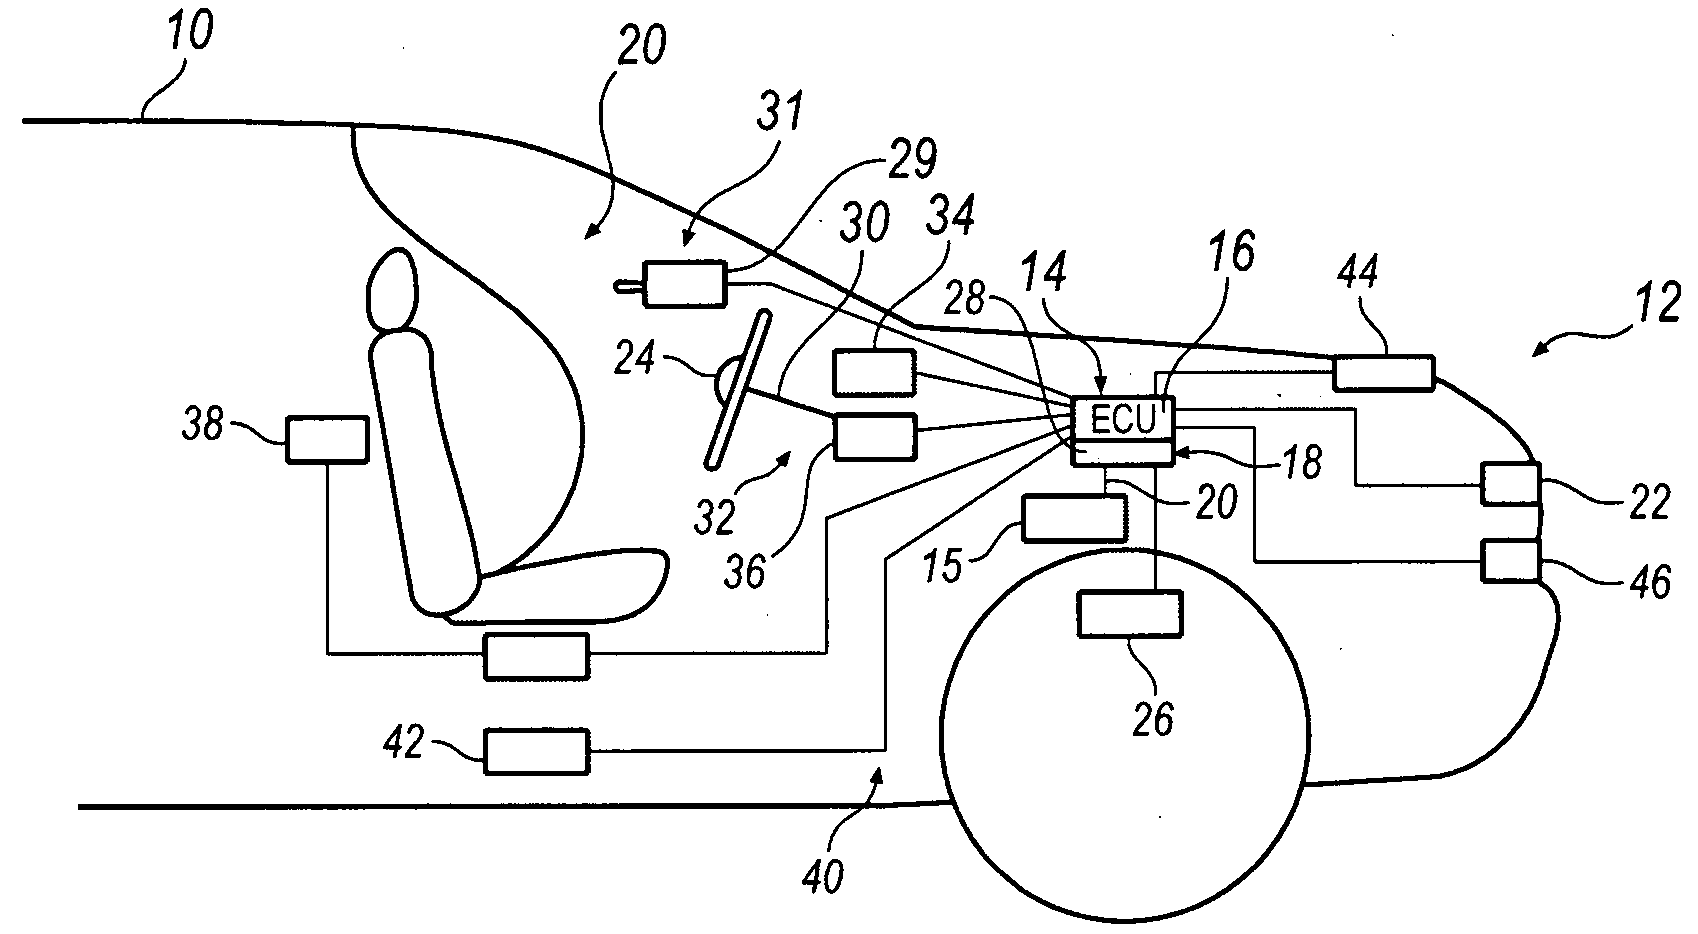 System and method for implementing active safety counter measures for an impaired driver